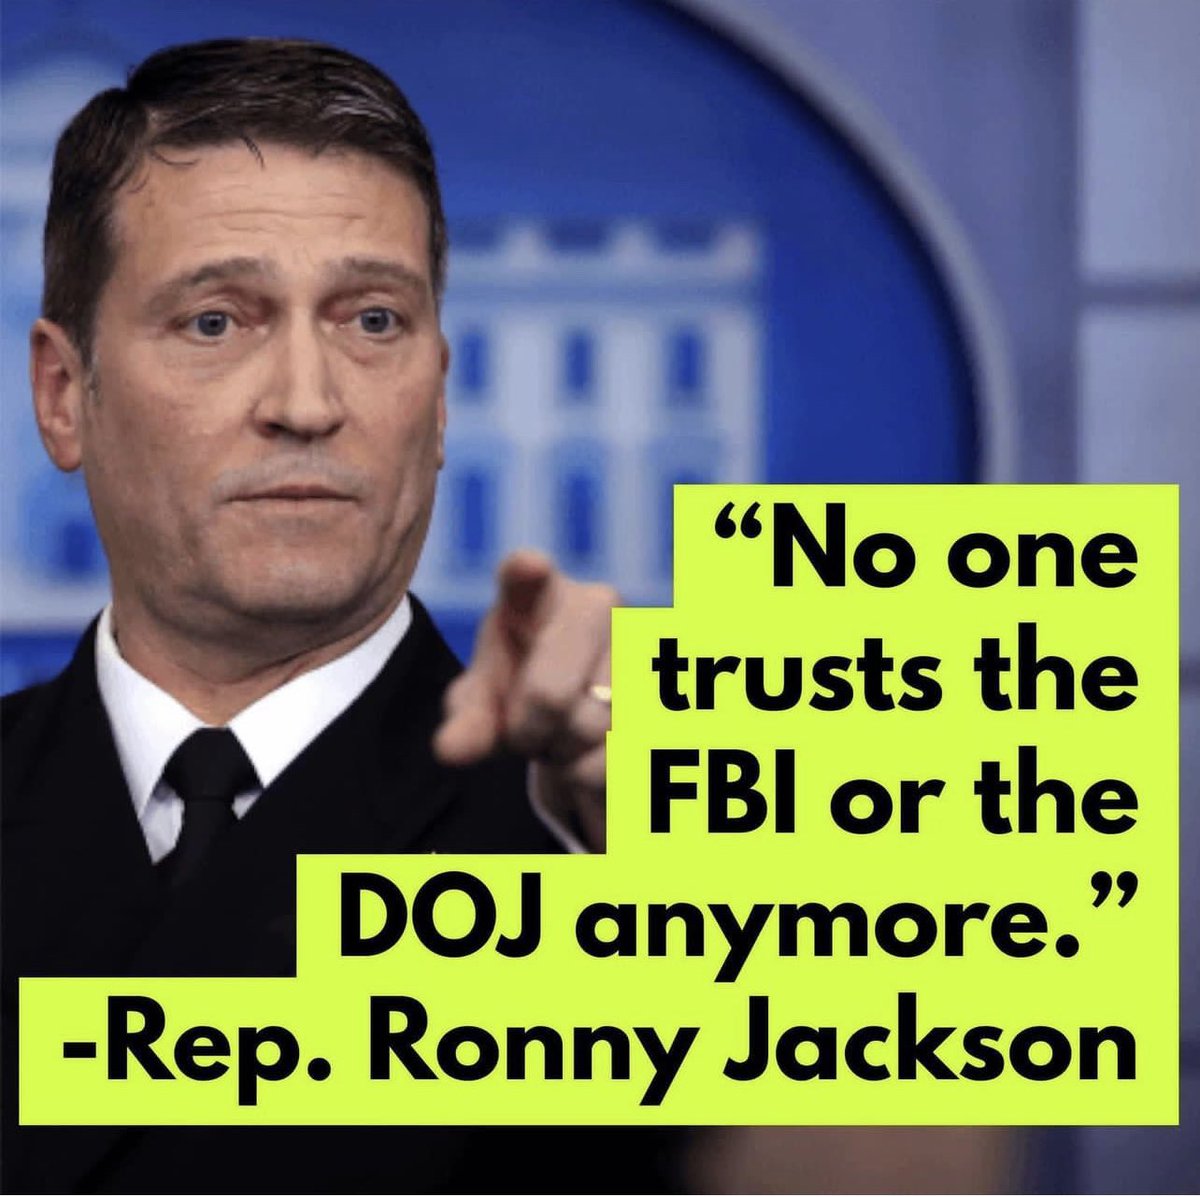 The FBI and DOJ should be defunded.